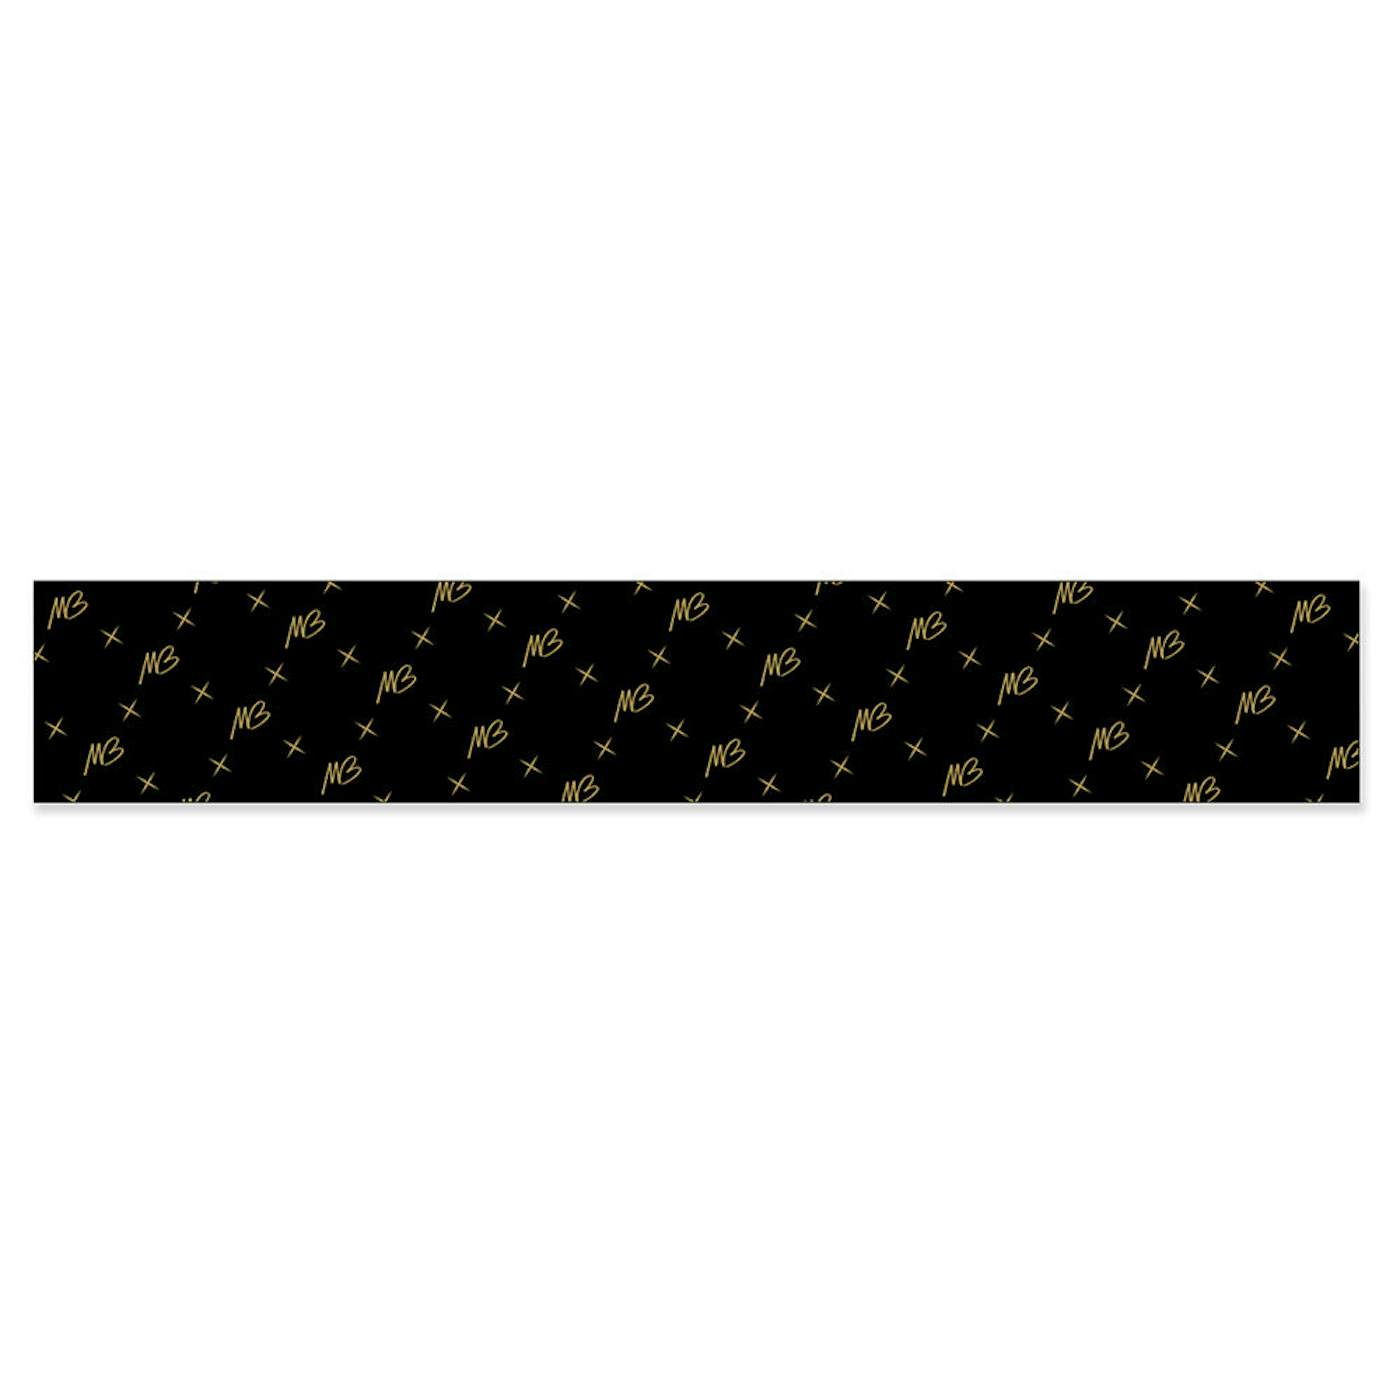 Michael Bublé Initials Black and Gold Woven Scarf